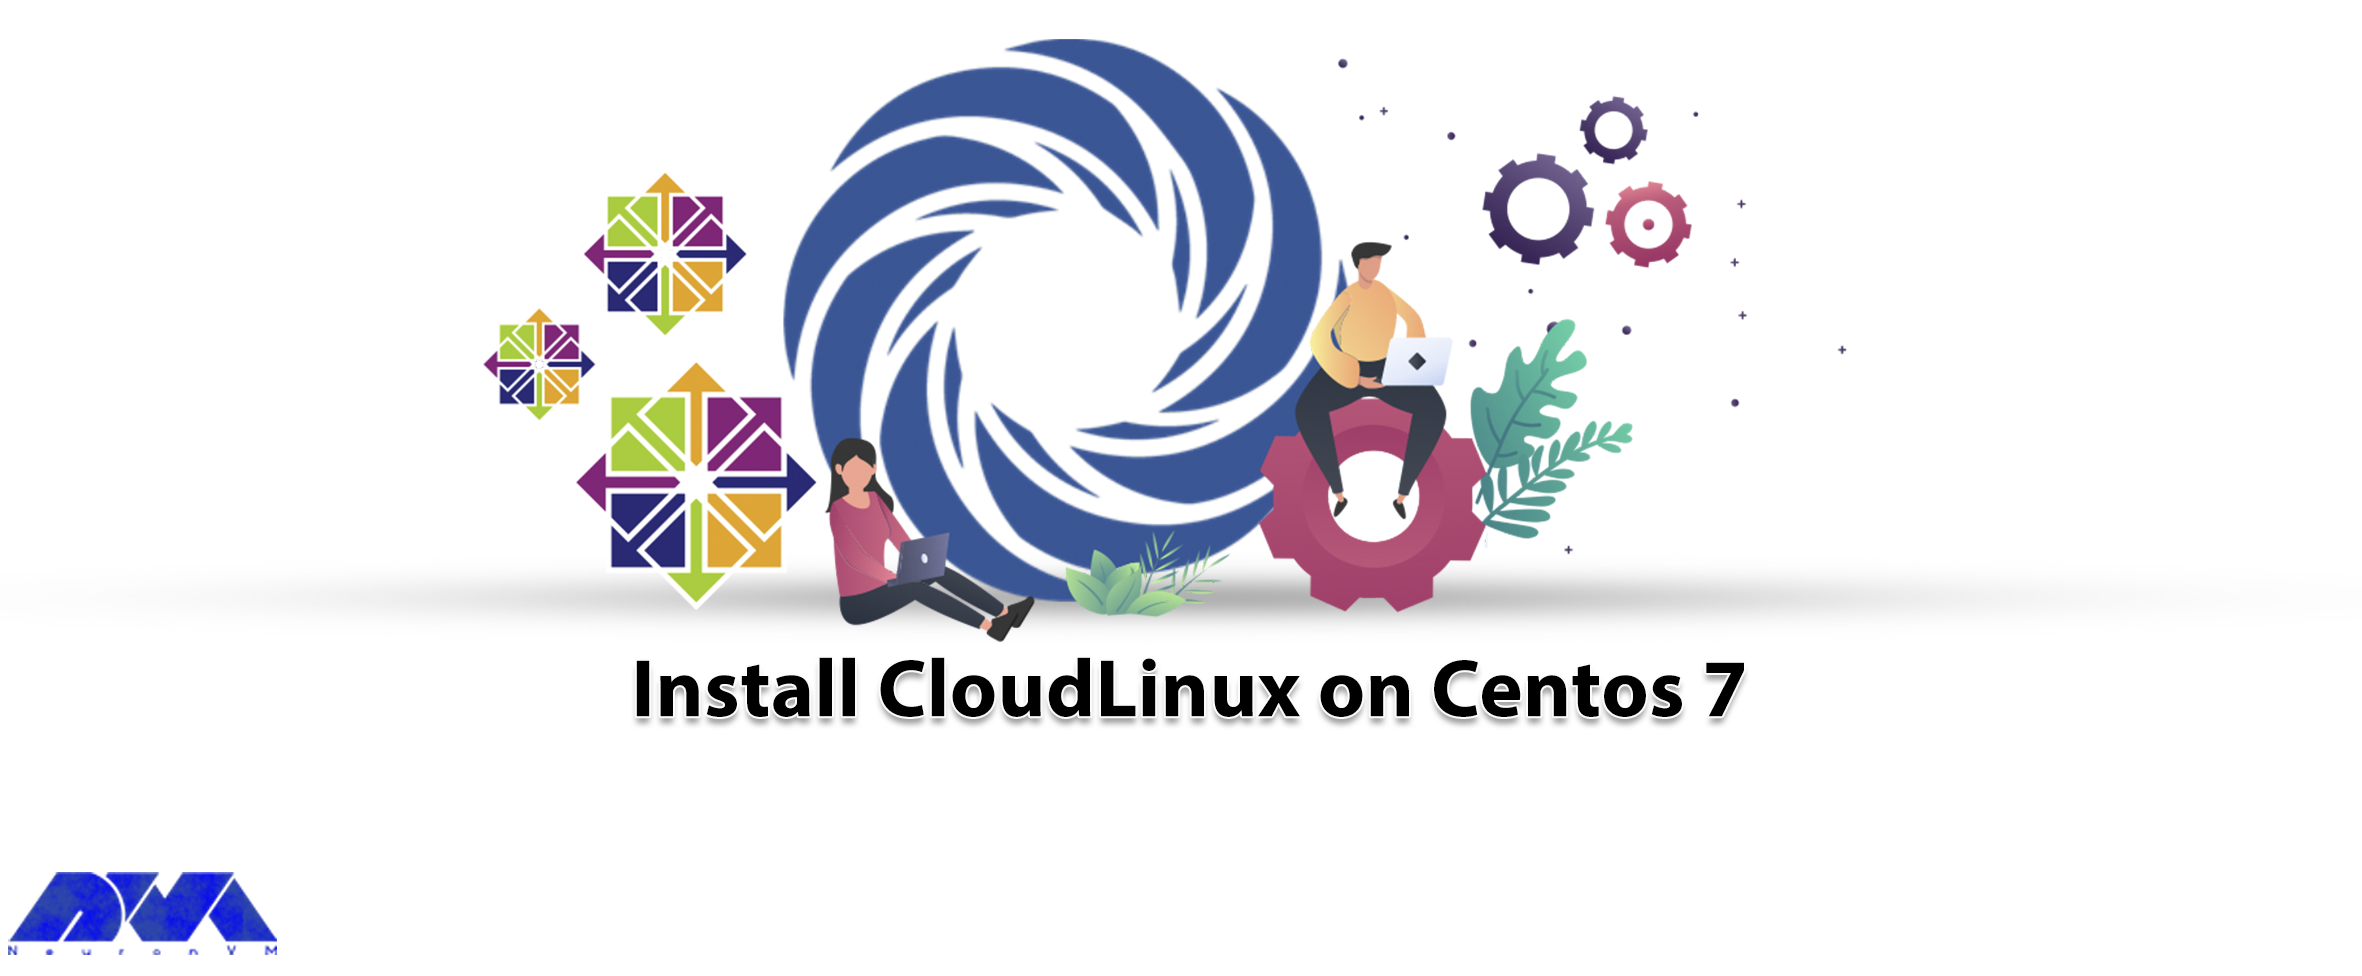 How To Install CloudLinux on Centos 7 - NeuronVM